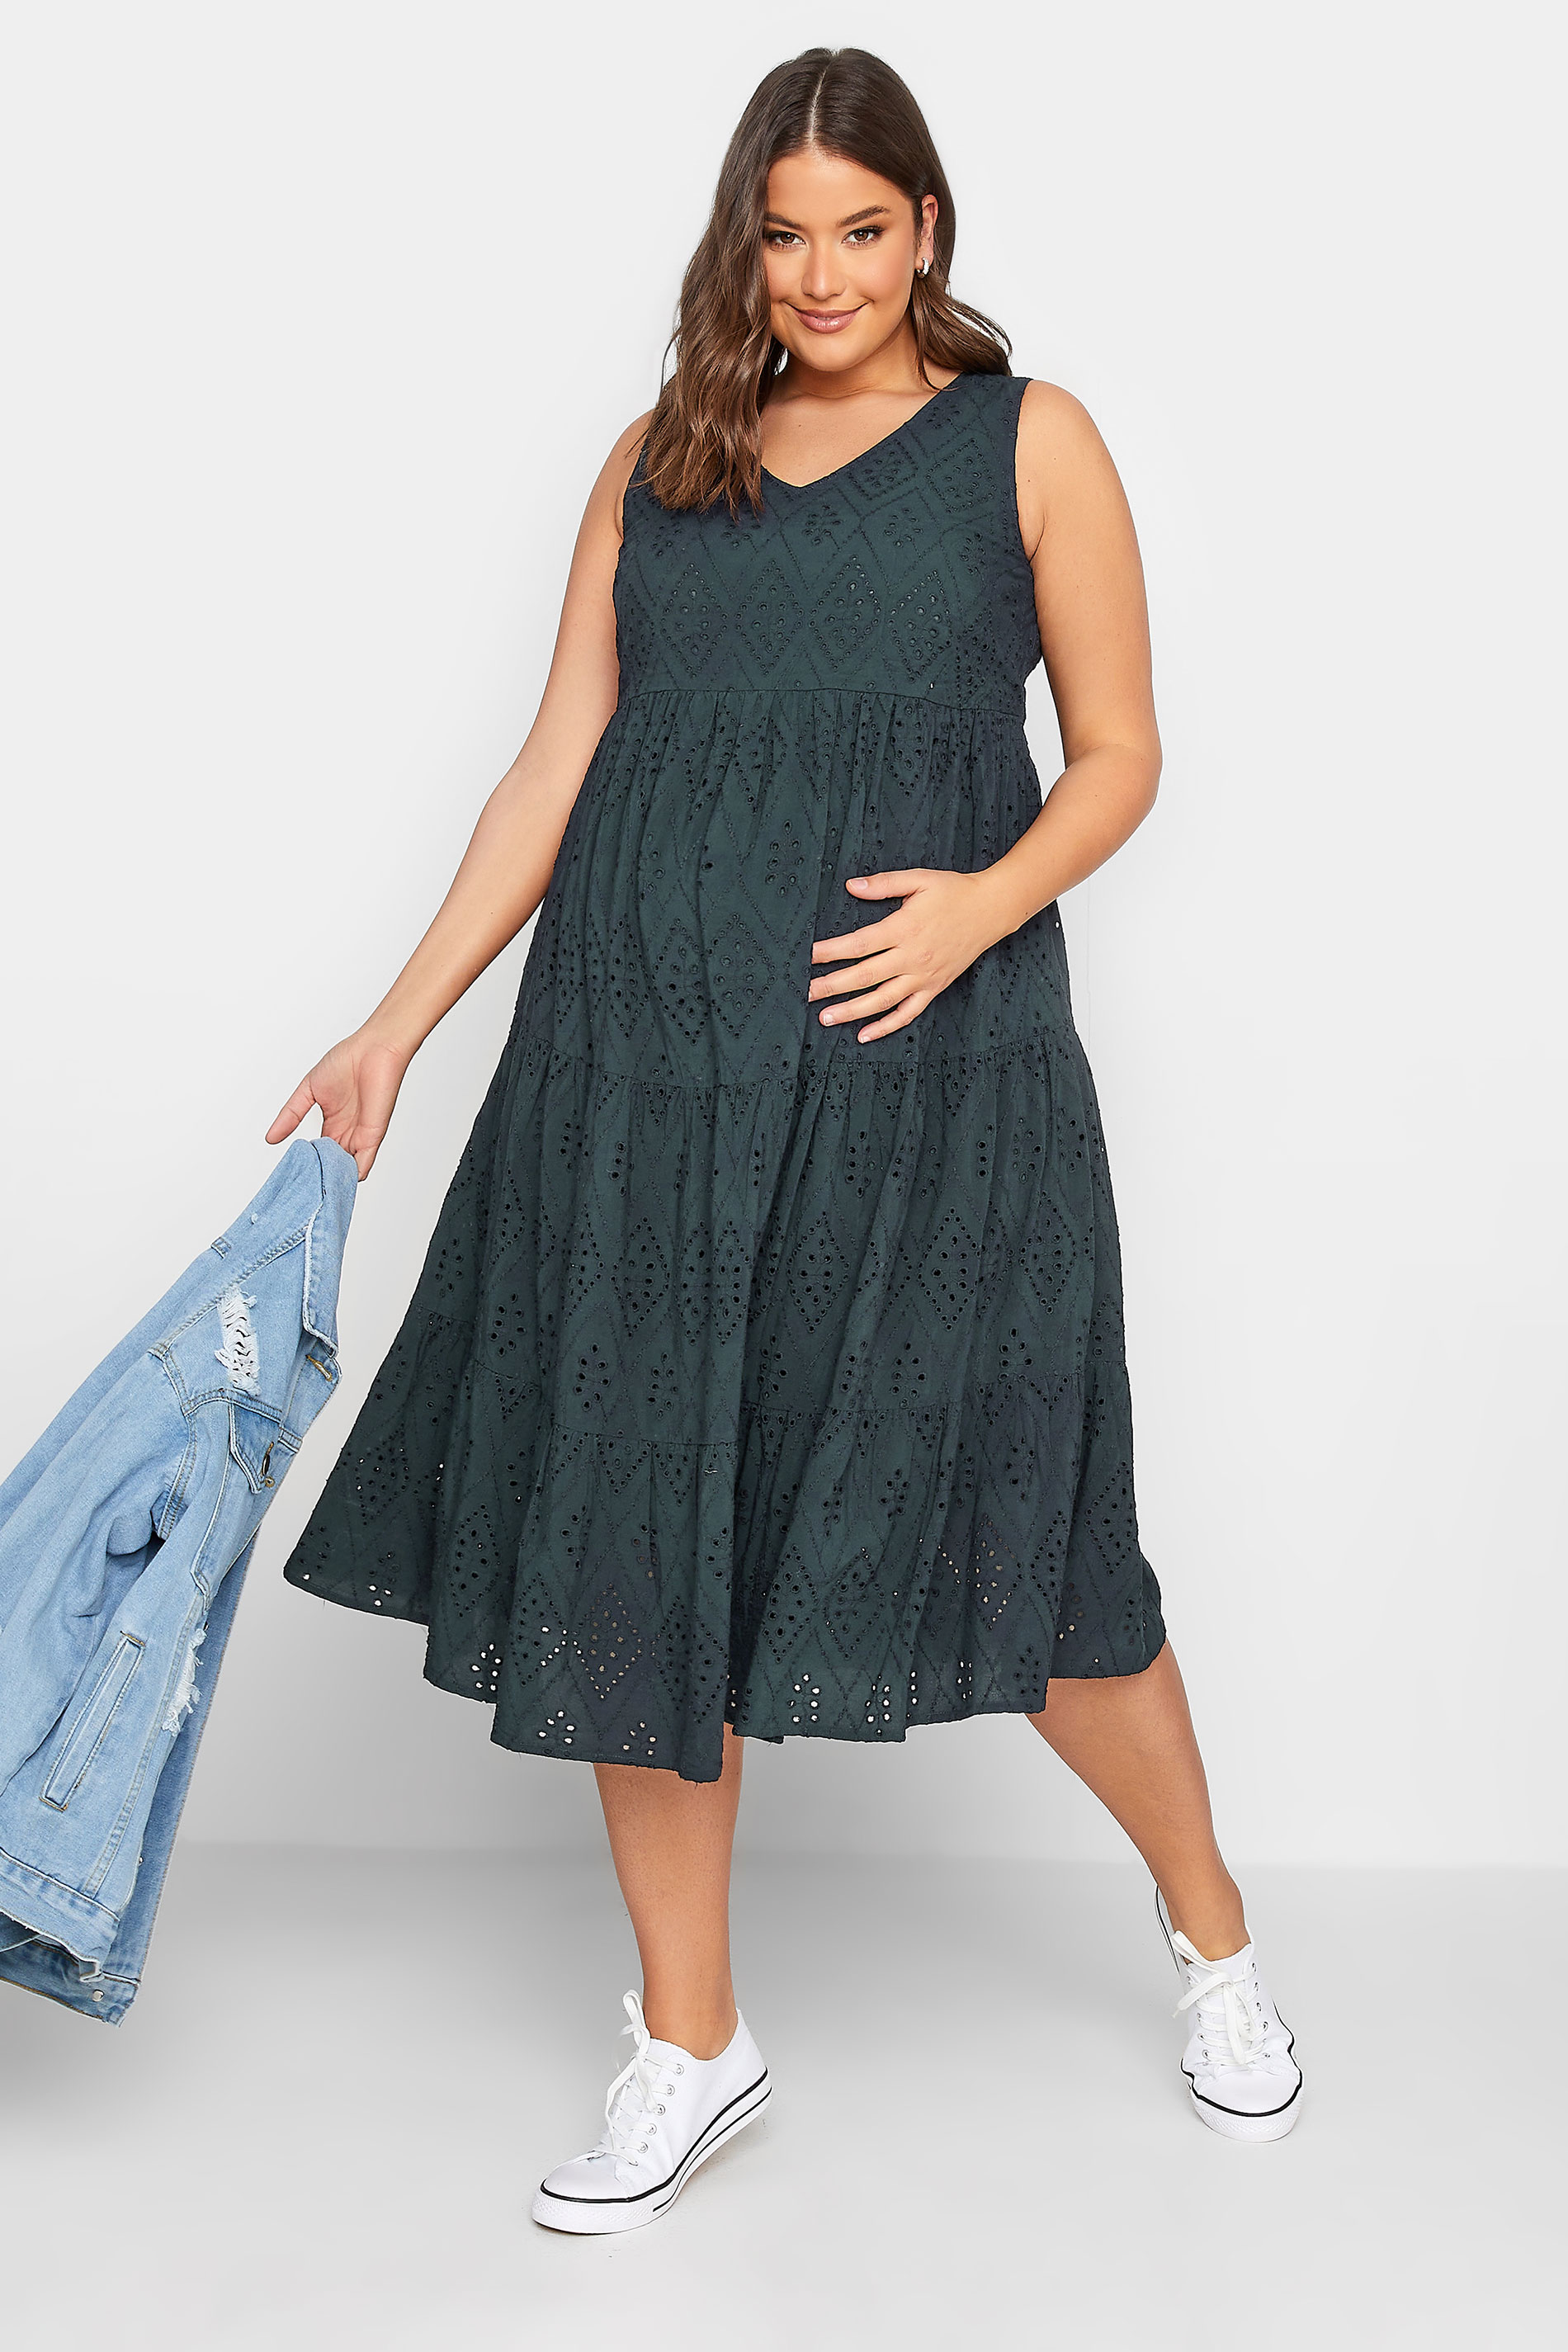 BUMP IT UP MATERNITY Plus Size Curve Navy Blue Tiered Broderie Dress | Yours Clothing  3